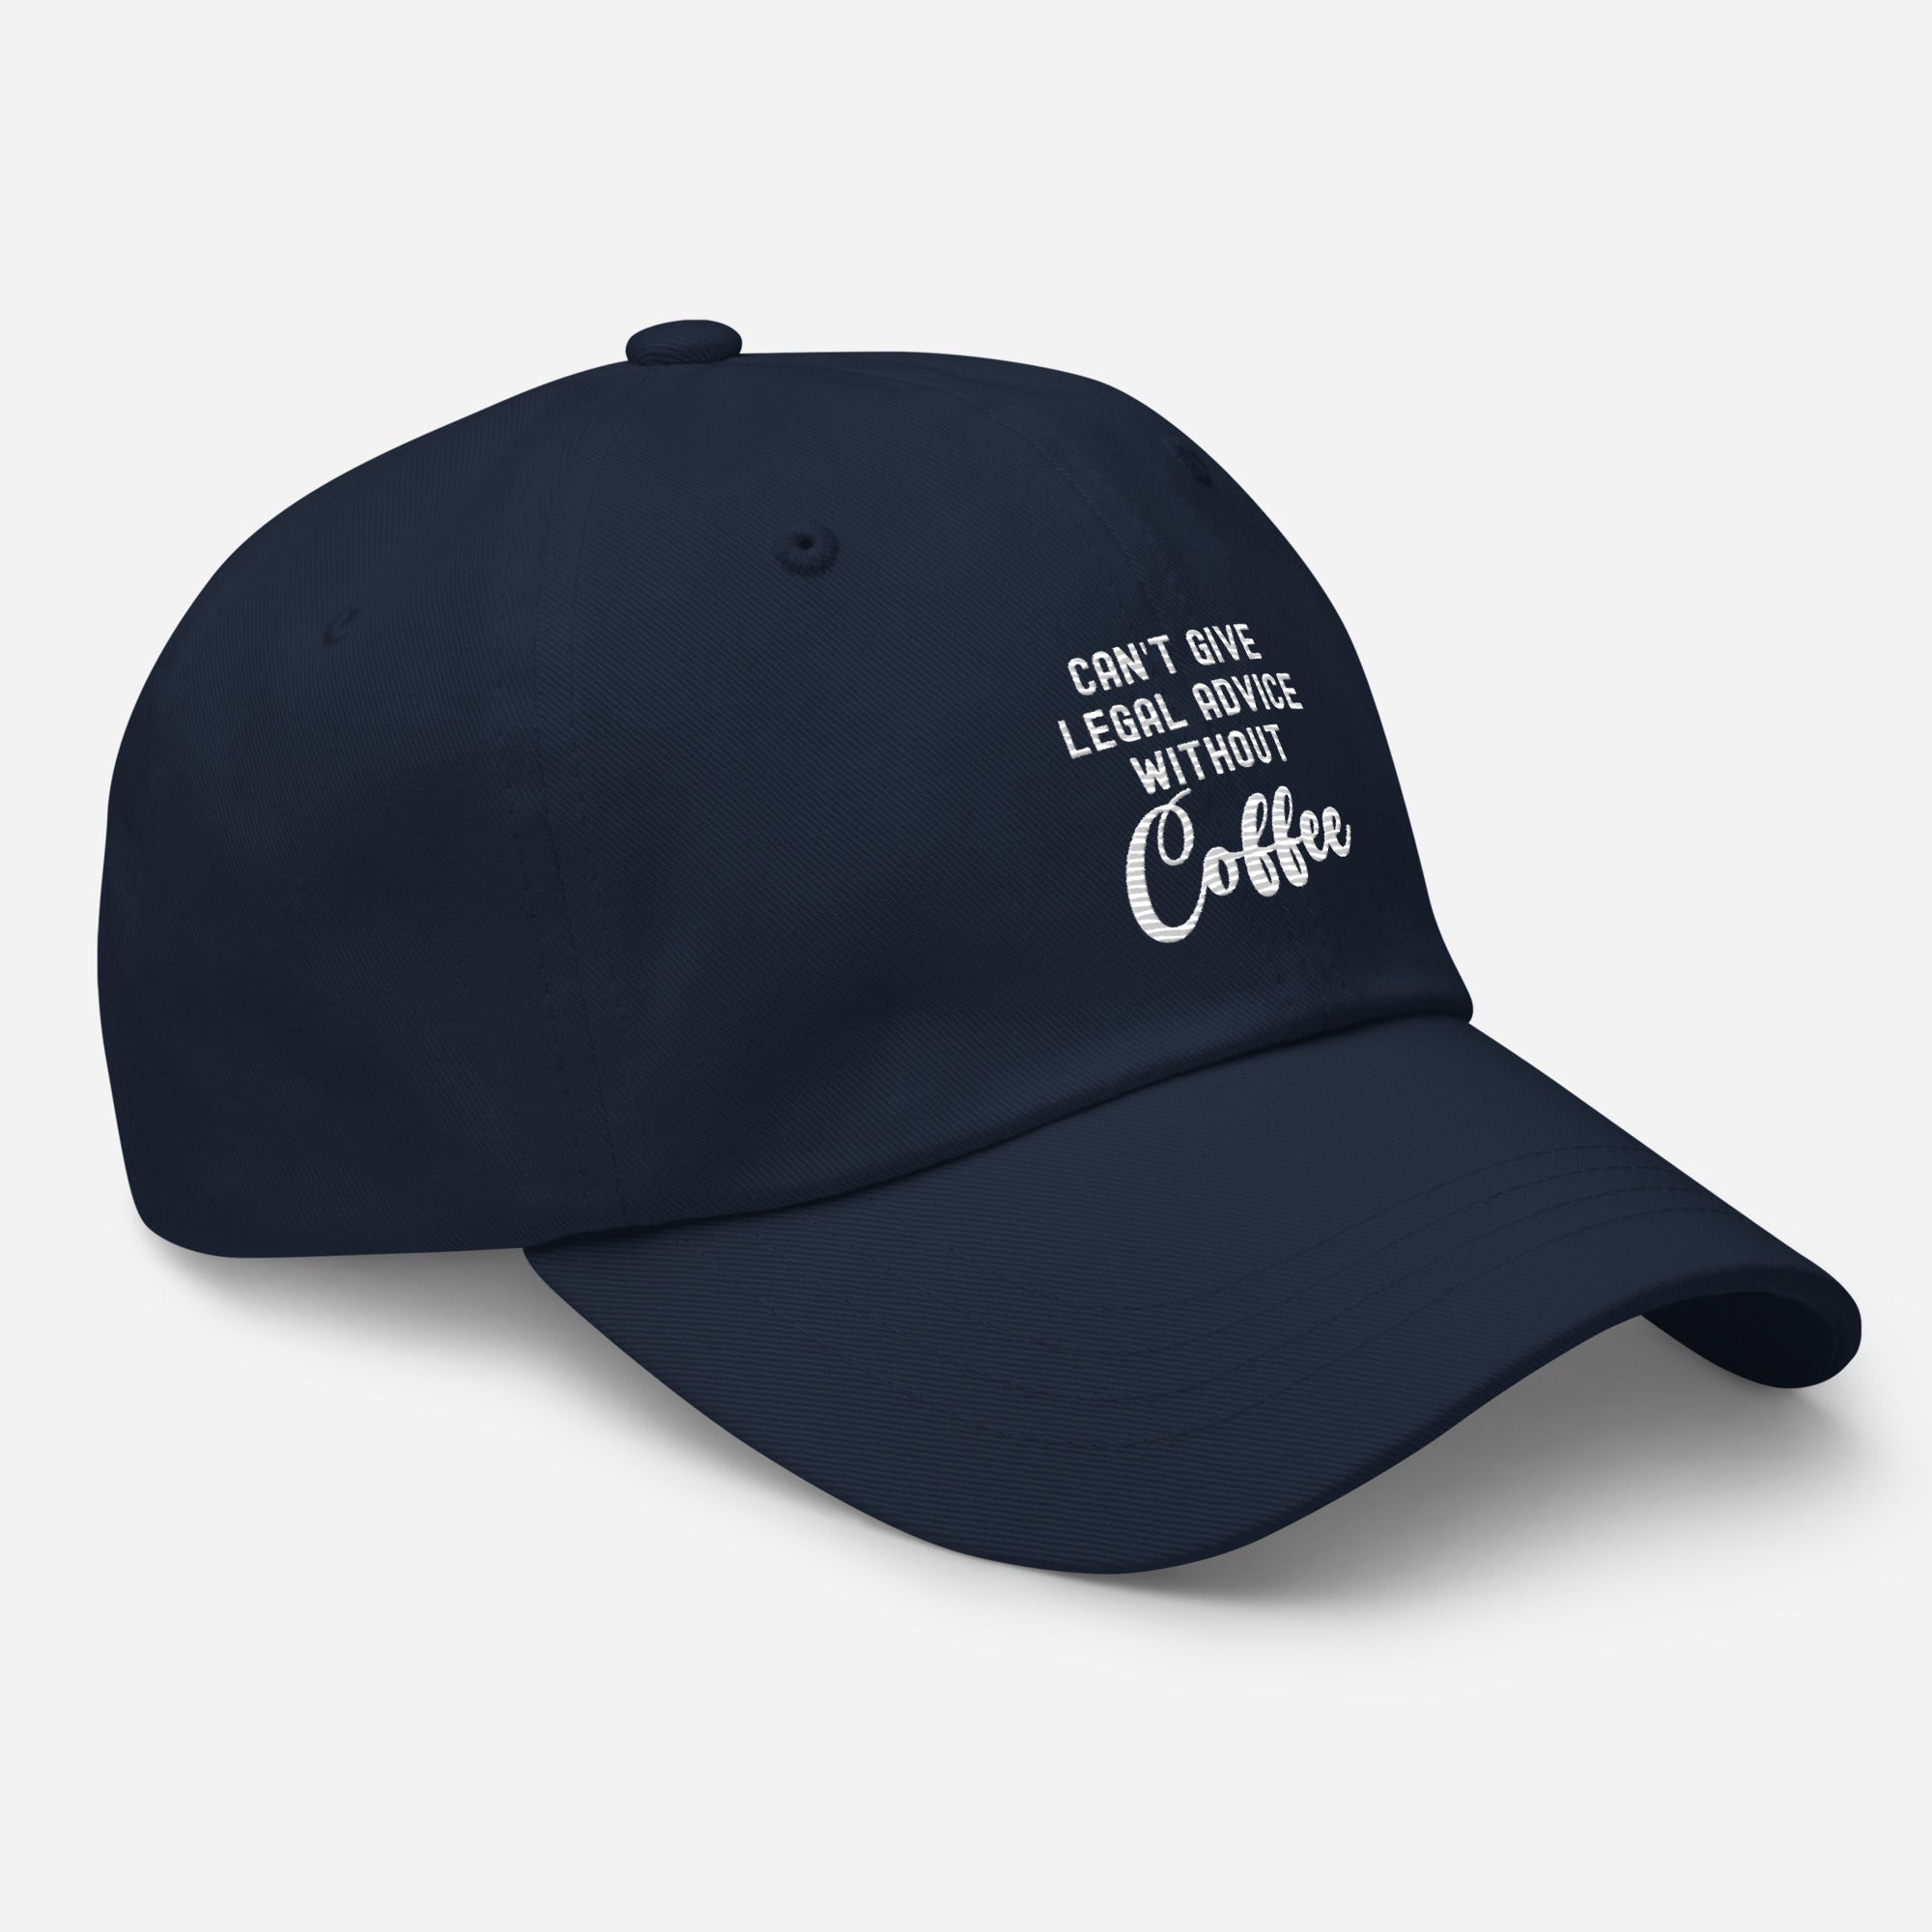 Hat | Can’t give legal advice without coffee